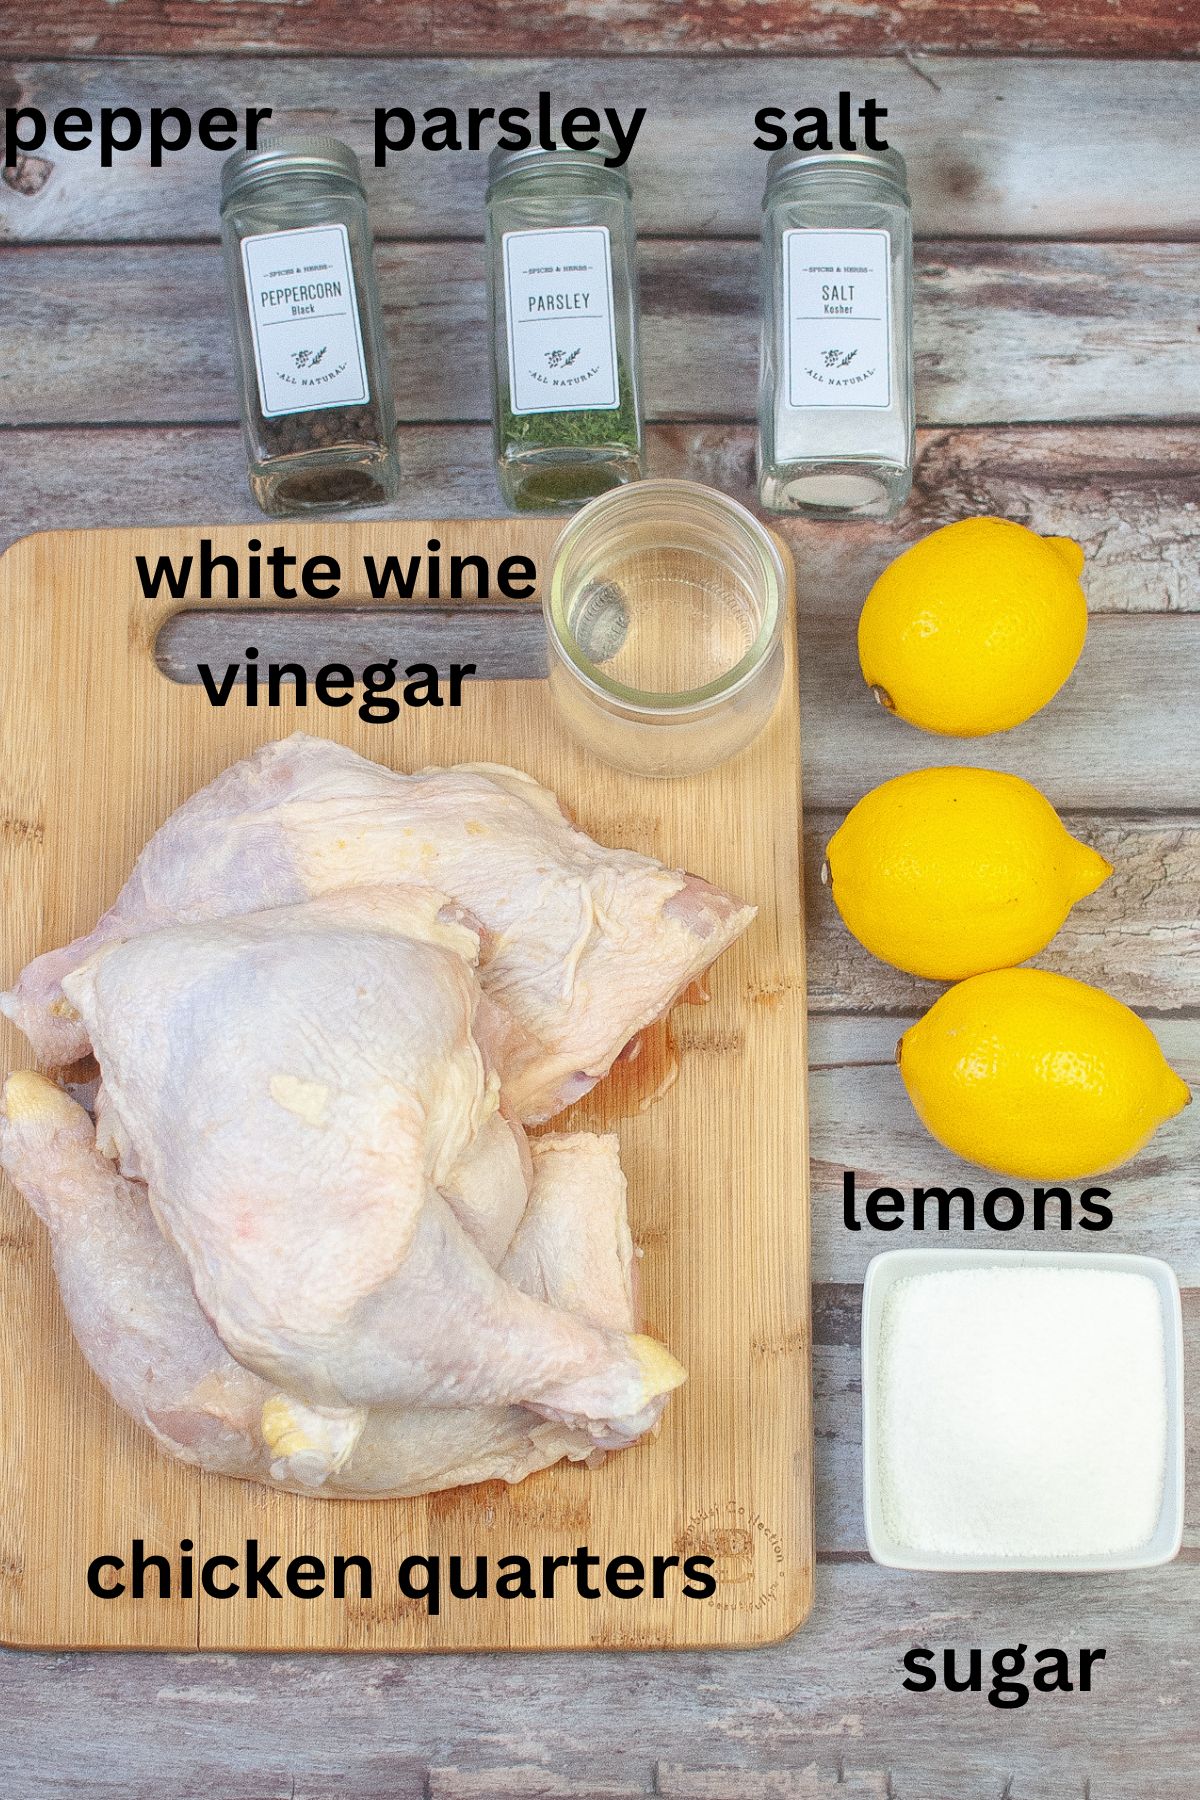 pepper, parsley, salt, white wine vinegar, lemons, sugar, and chicken quarters on a wooden background labelled with text